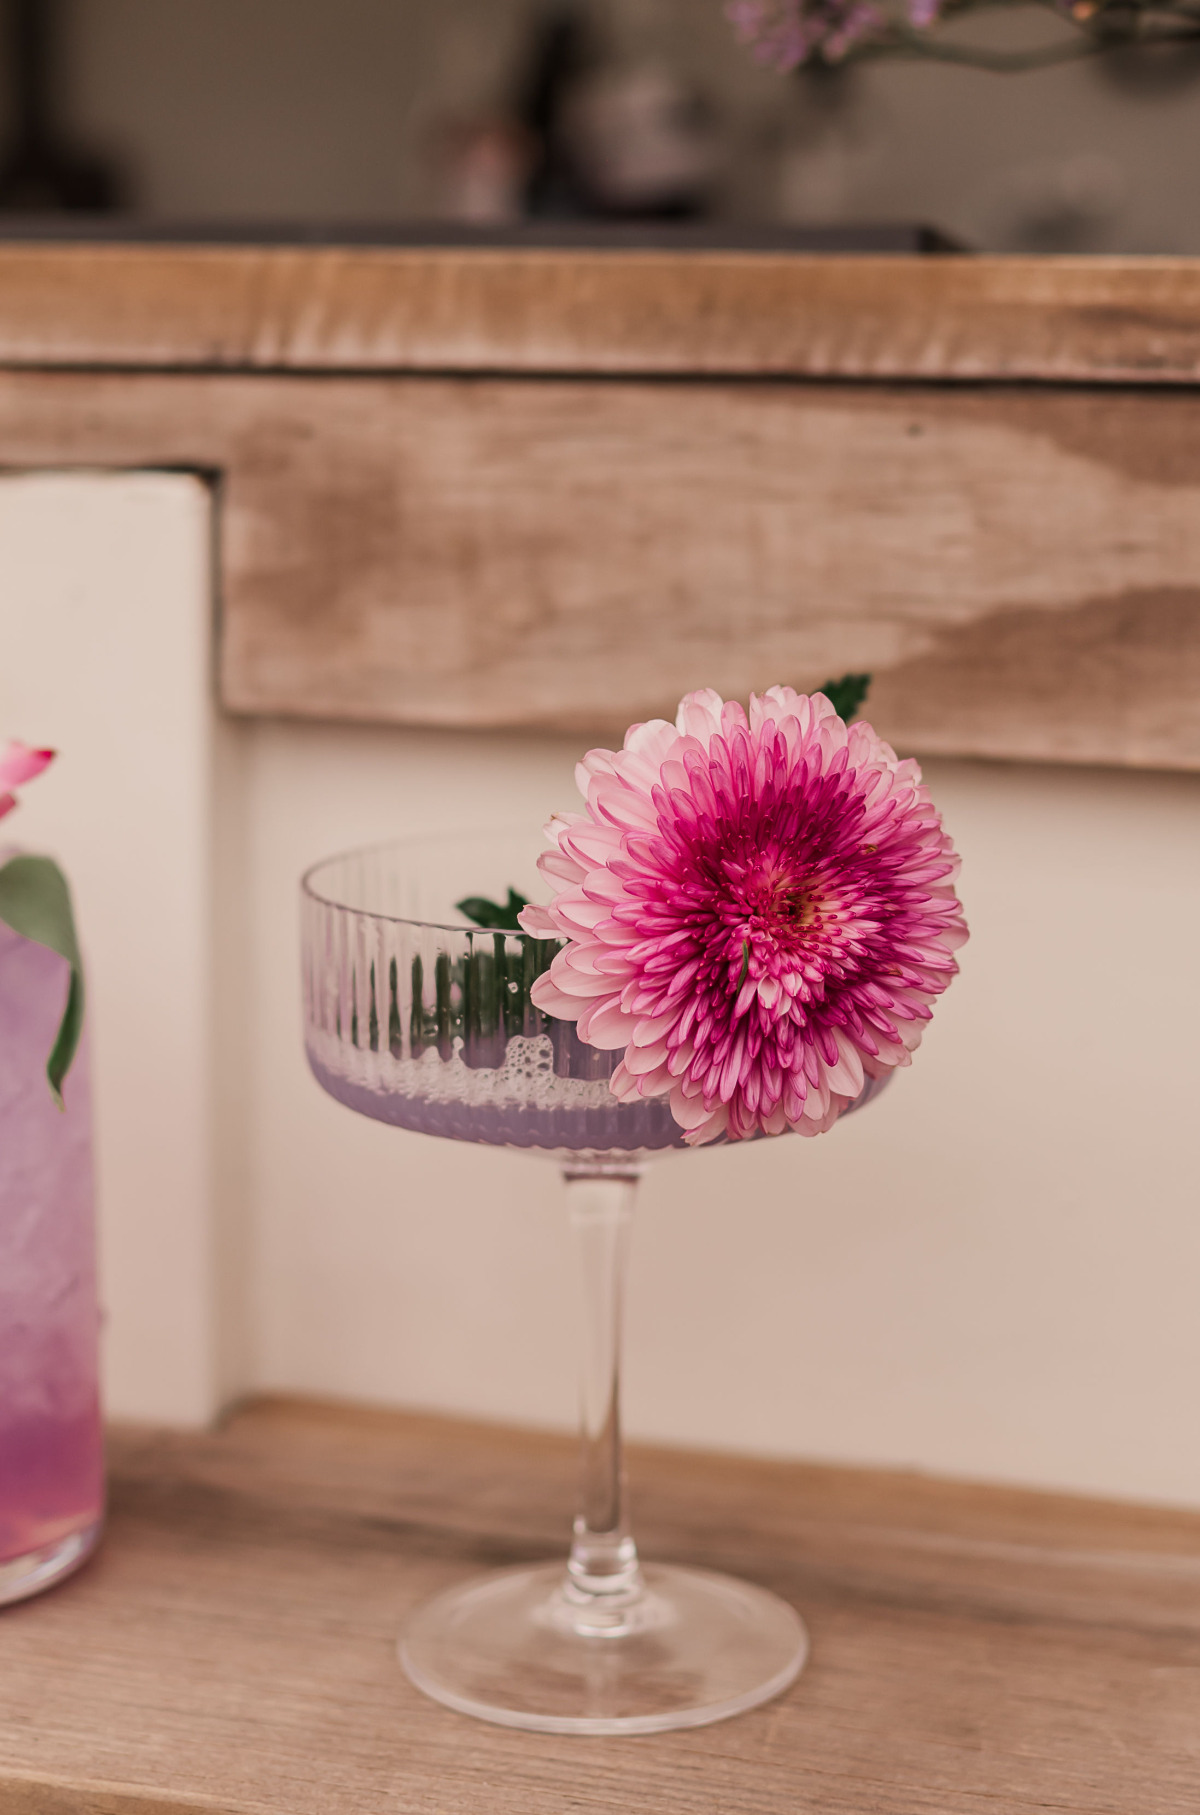 How to Create 3 Superb Pantone Cocktails with 4 Ingredients